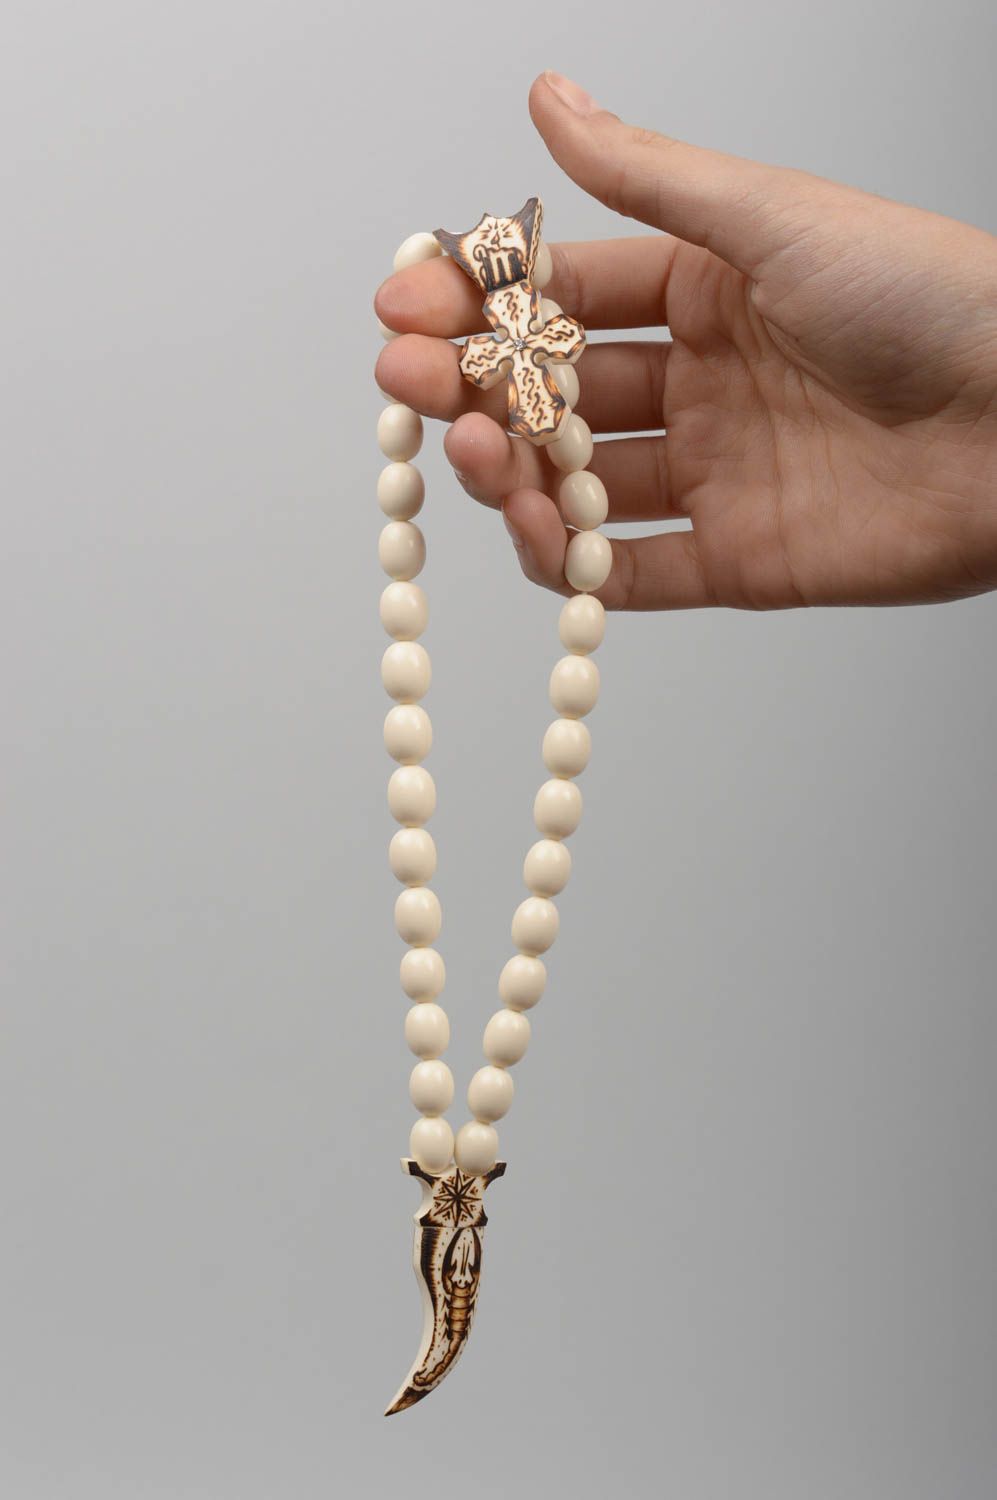 Handmade beaded rosary for praying present for believer religious items photo 5